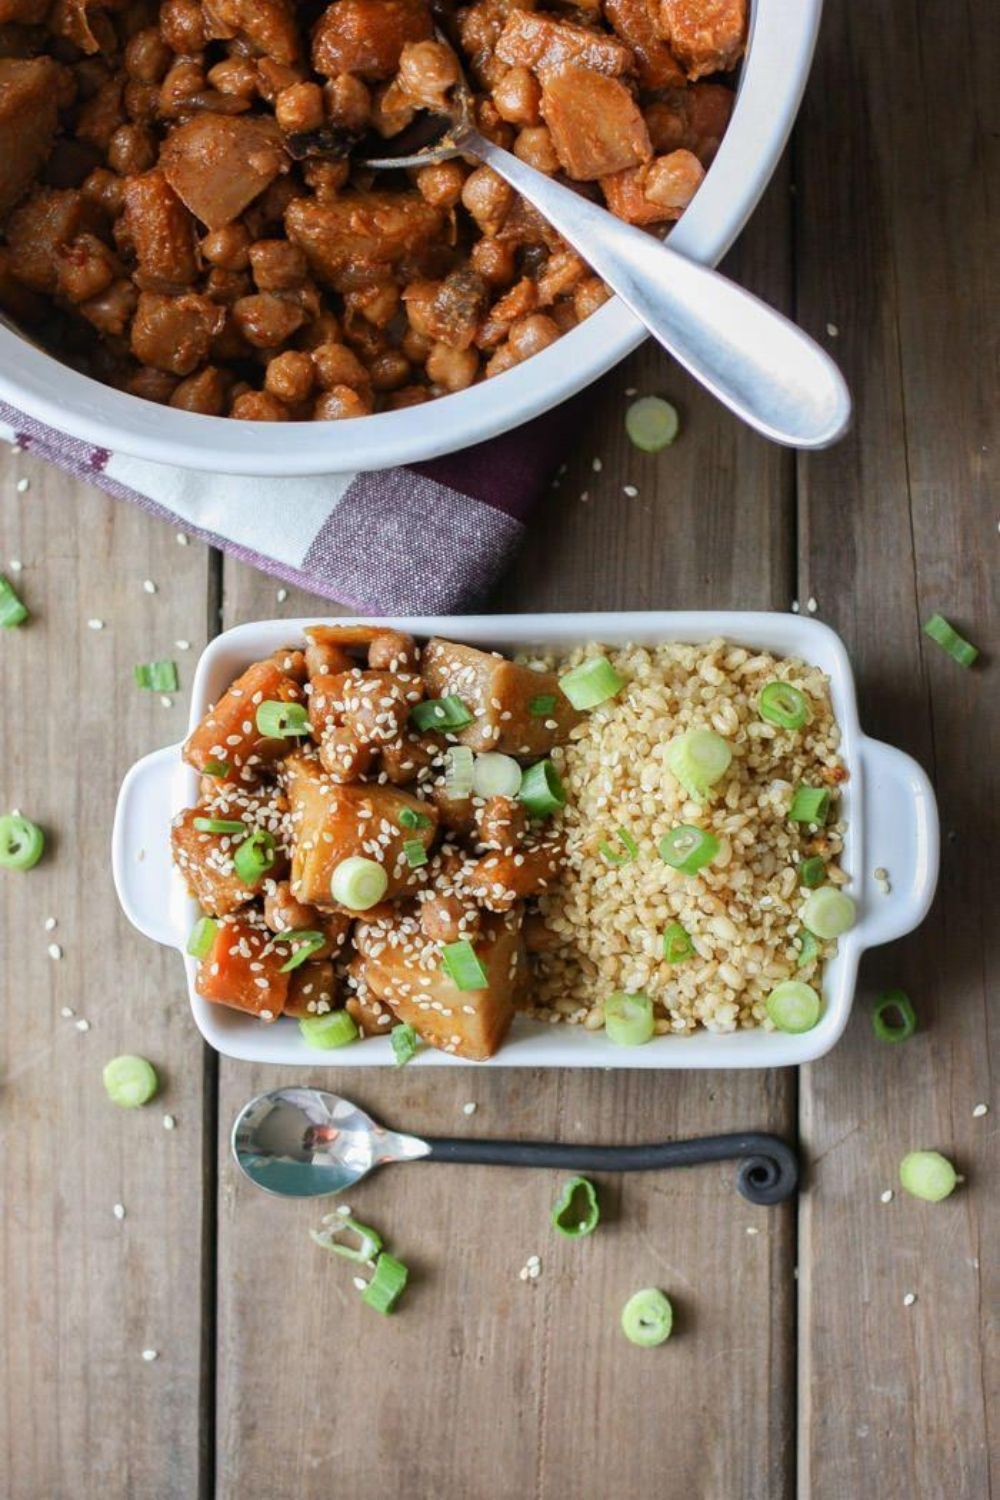 Korean Chickpea with Carrots and Potatoes over Quinoa